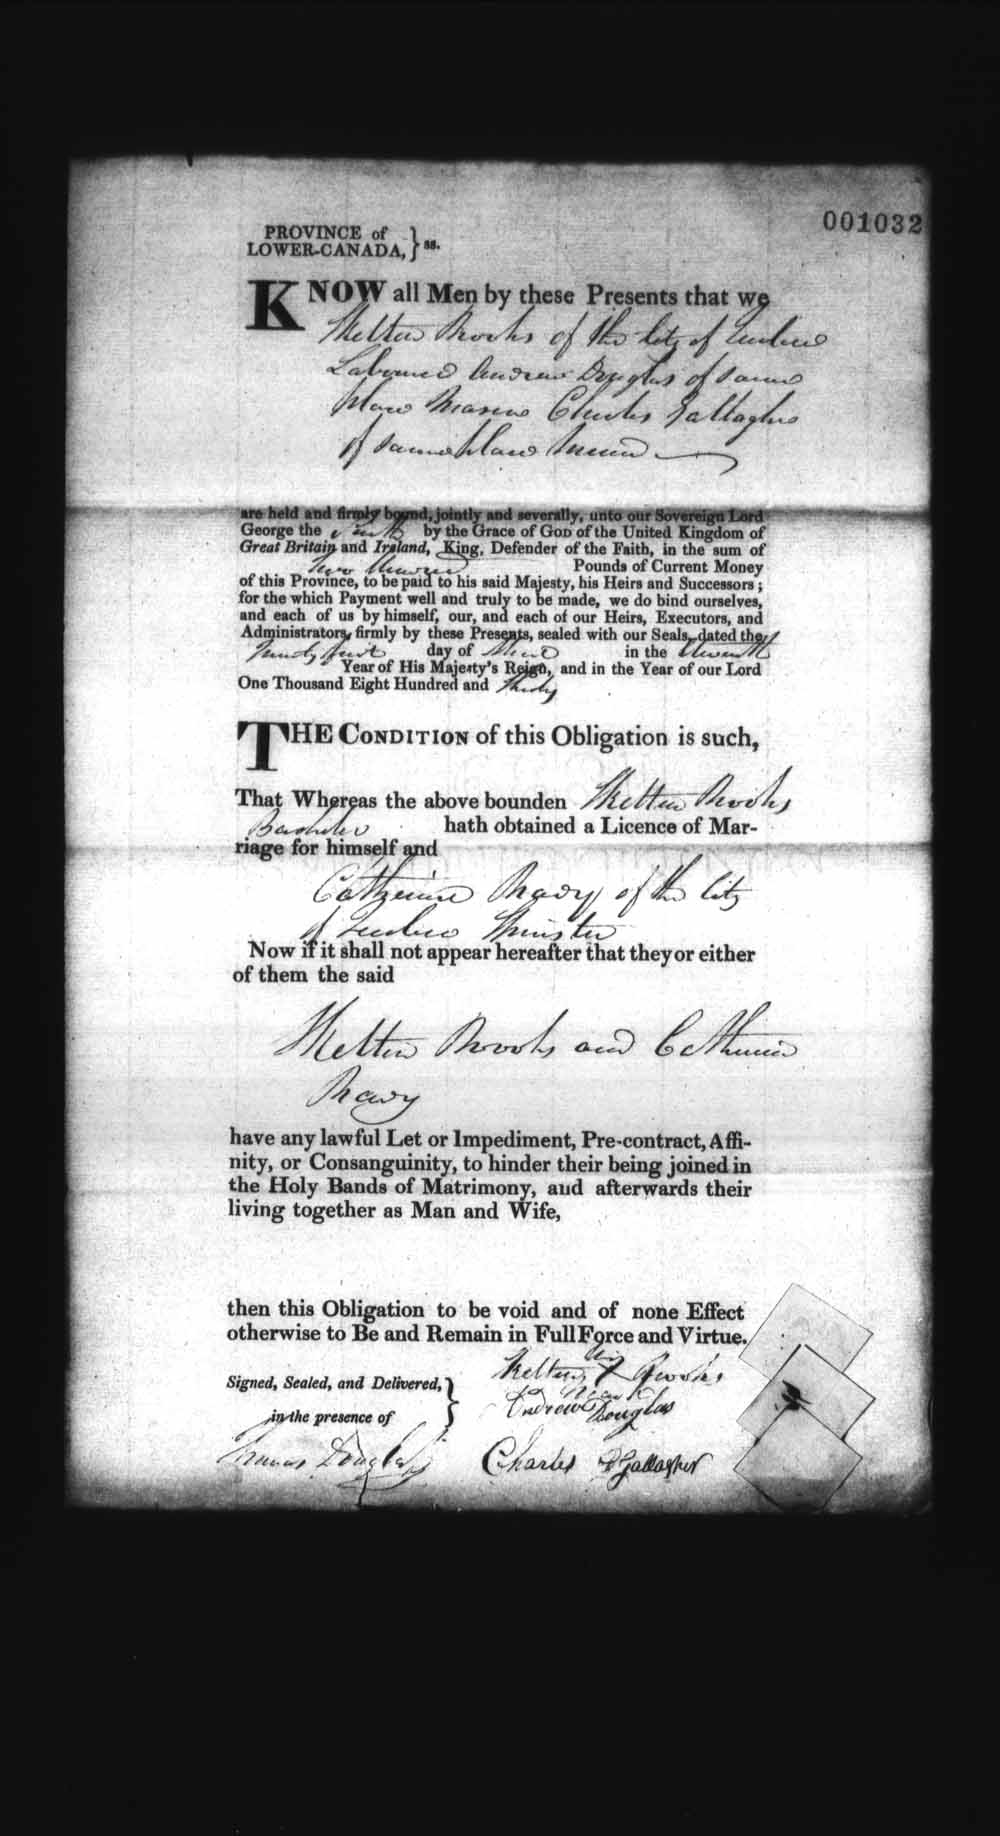 Digitized page of Upper and Lower Canada Marriage Bonds (1779-1865) for Image No.: e008237153